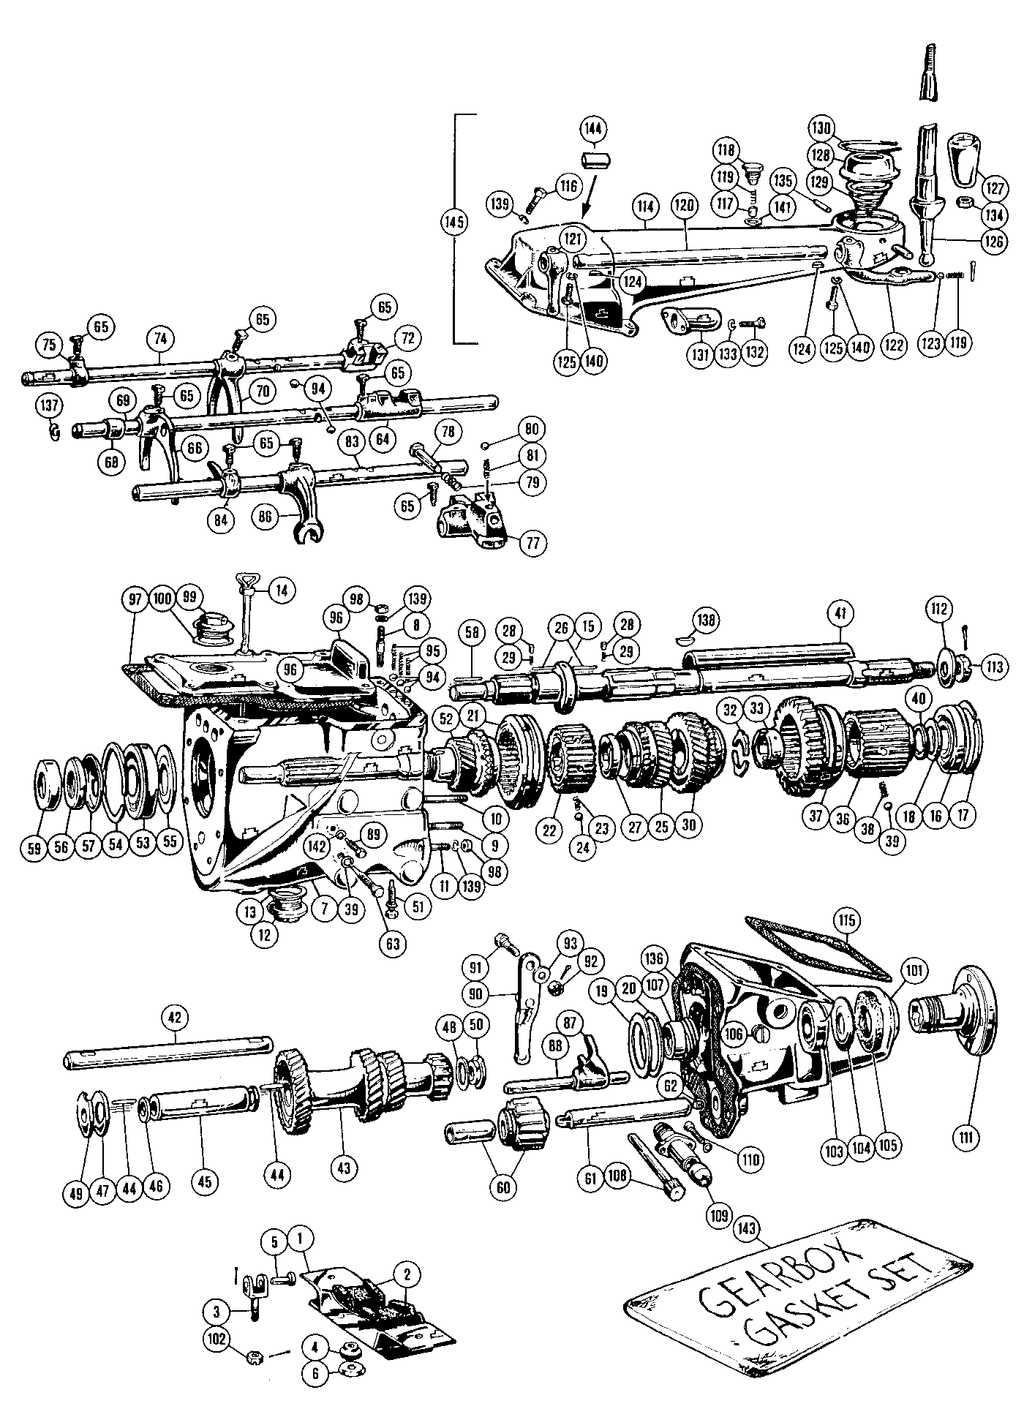 MGTD-TF 1949-1955 - Gear linkages | Webshop Anglo Parts - 1